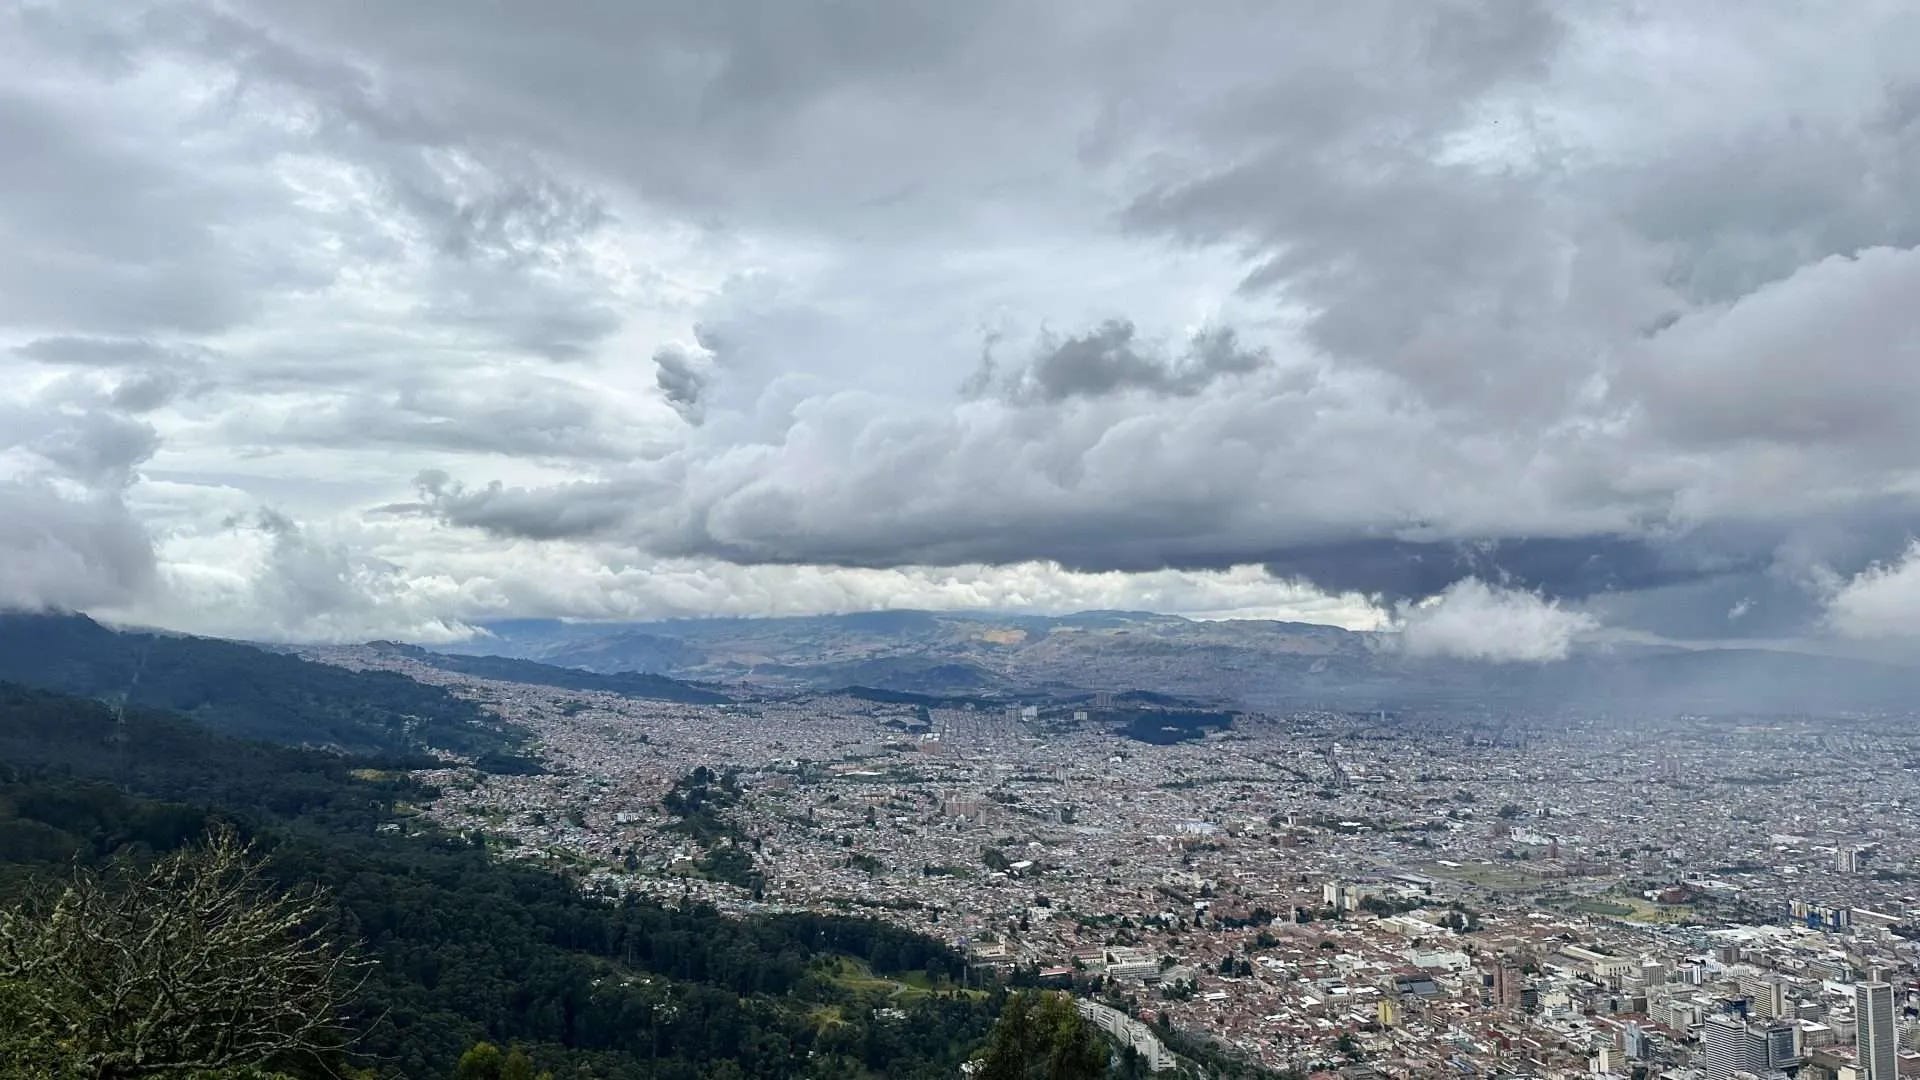 A panoramic view of a city sprawled over a flat valley with dense urban buildings, surrounded by green hills under a cloudy sky; perfect for those pivoting during long-term travel to experience both nature and urban environments.